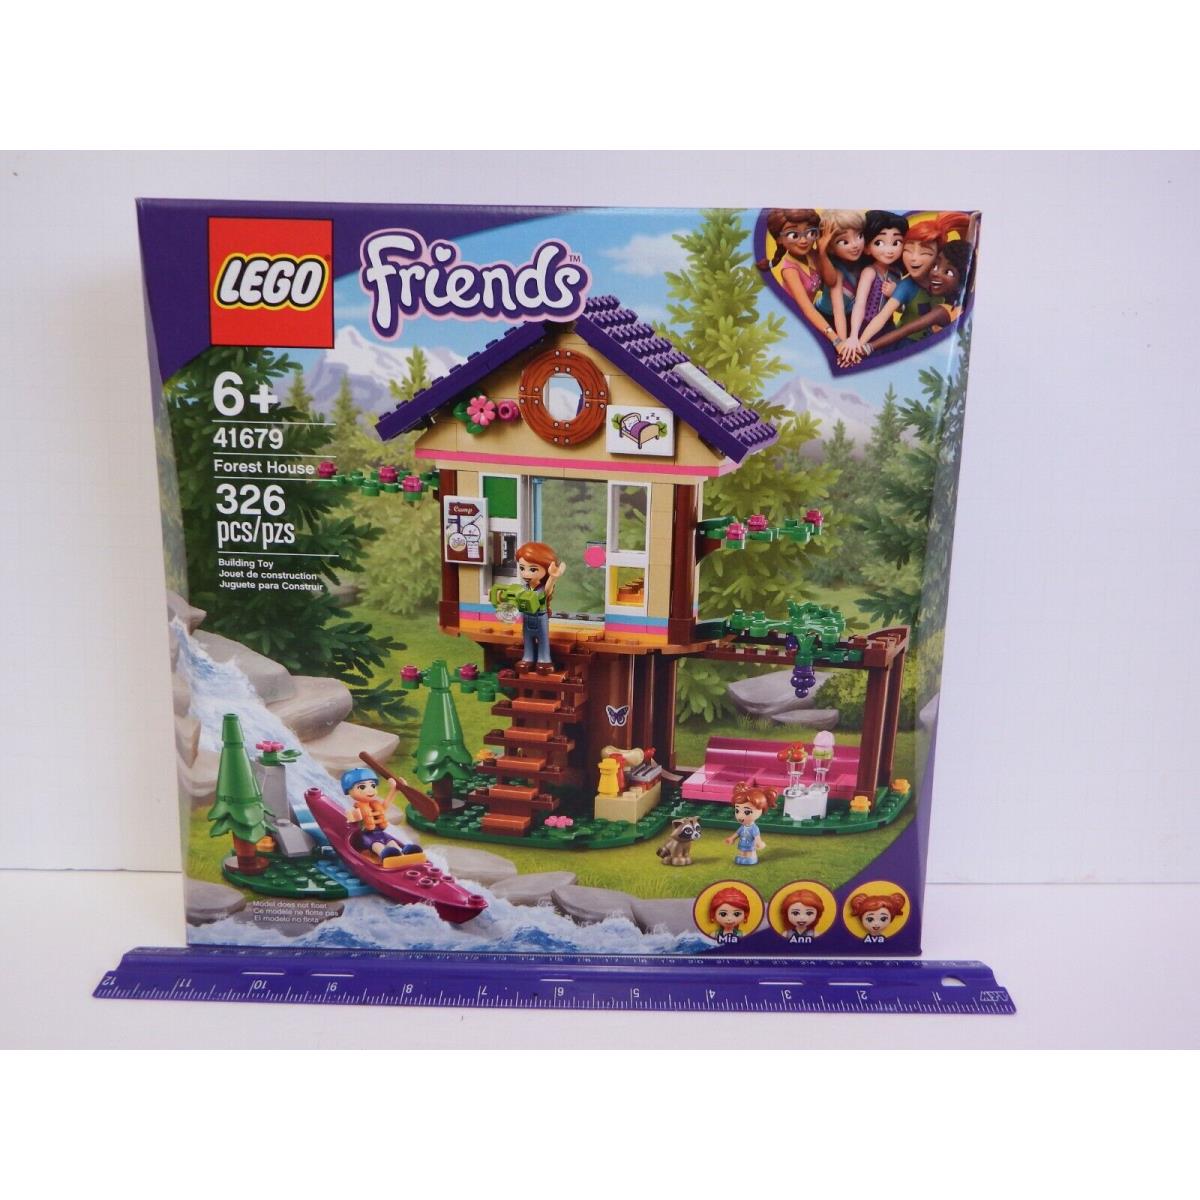 Lego- Friends 41679 - Forest House - 326 pc Set - Ages 6 up